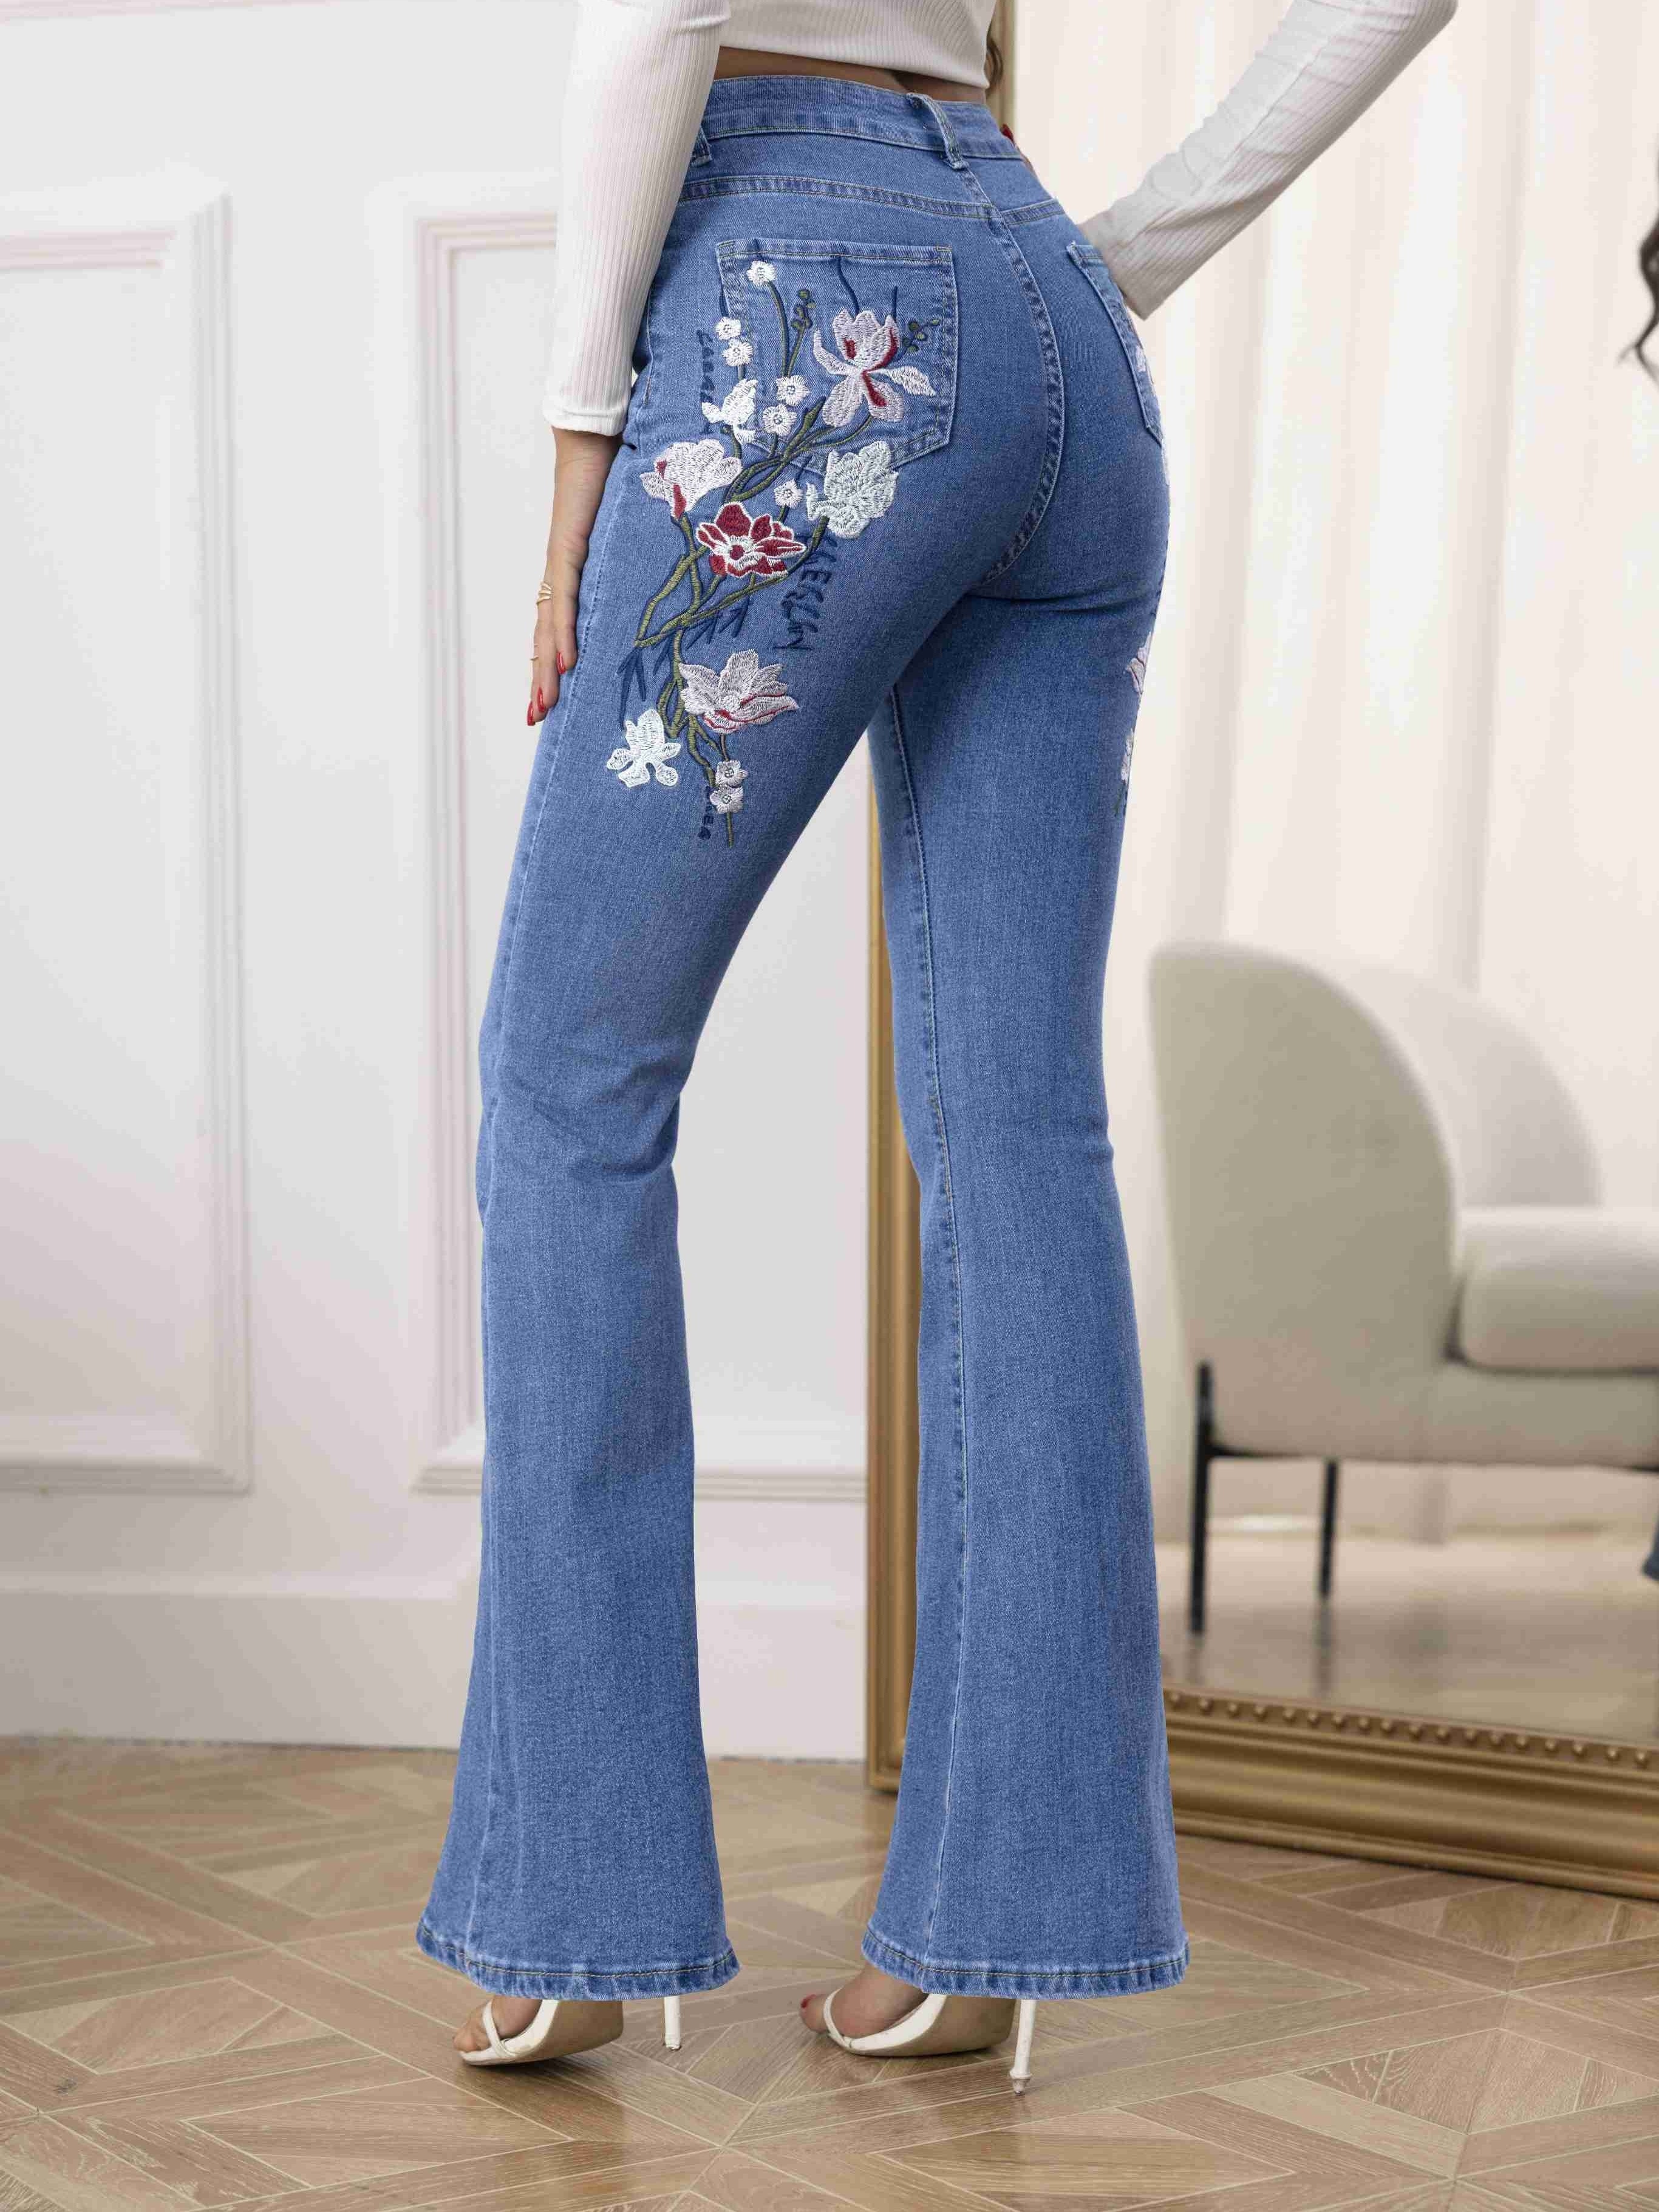 Plus Size Bell Bottom Jeans for Women Floral Embroidered High-Rise Flare  Jeans Stretch Skinny Fitted Denim Pants 